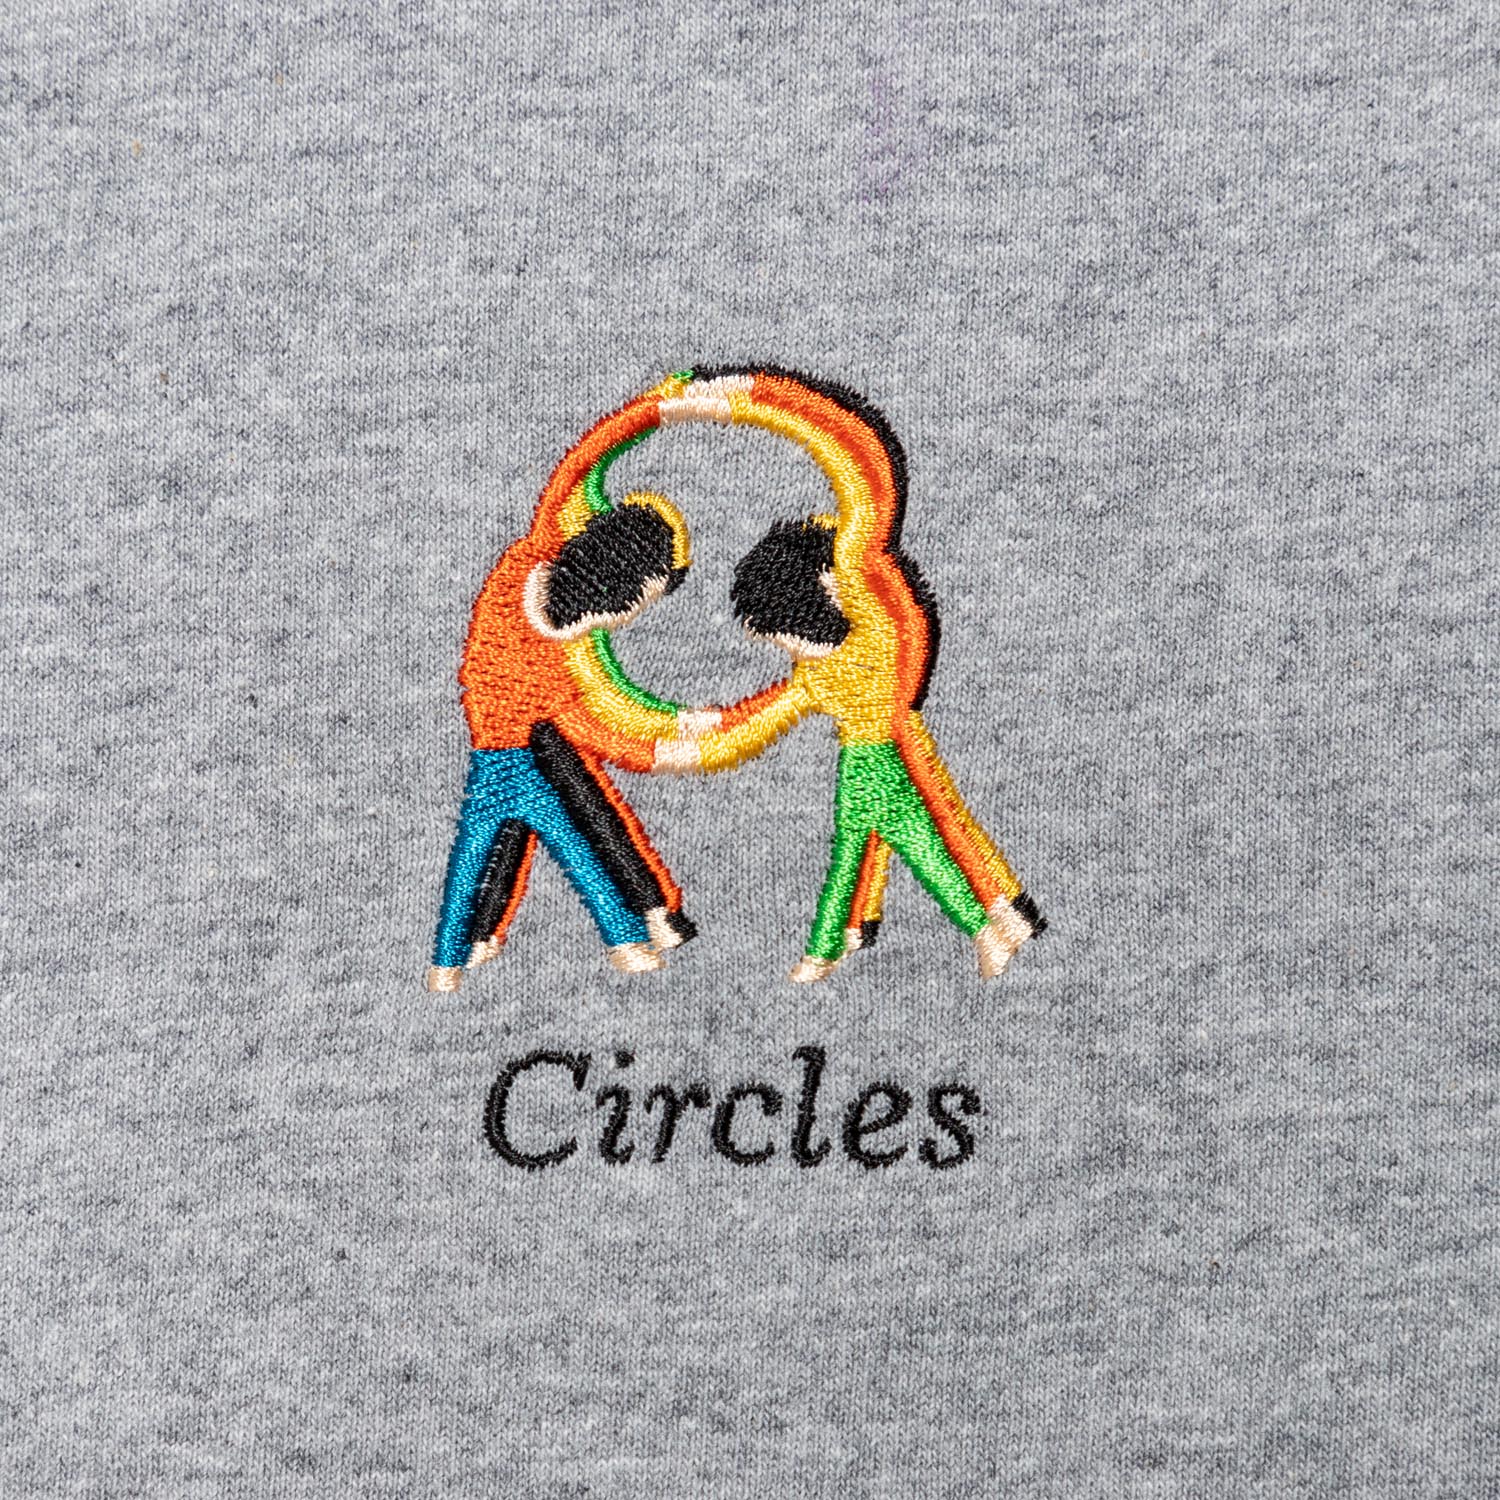 Circles LS designed by James Ulmer